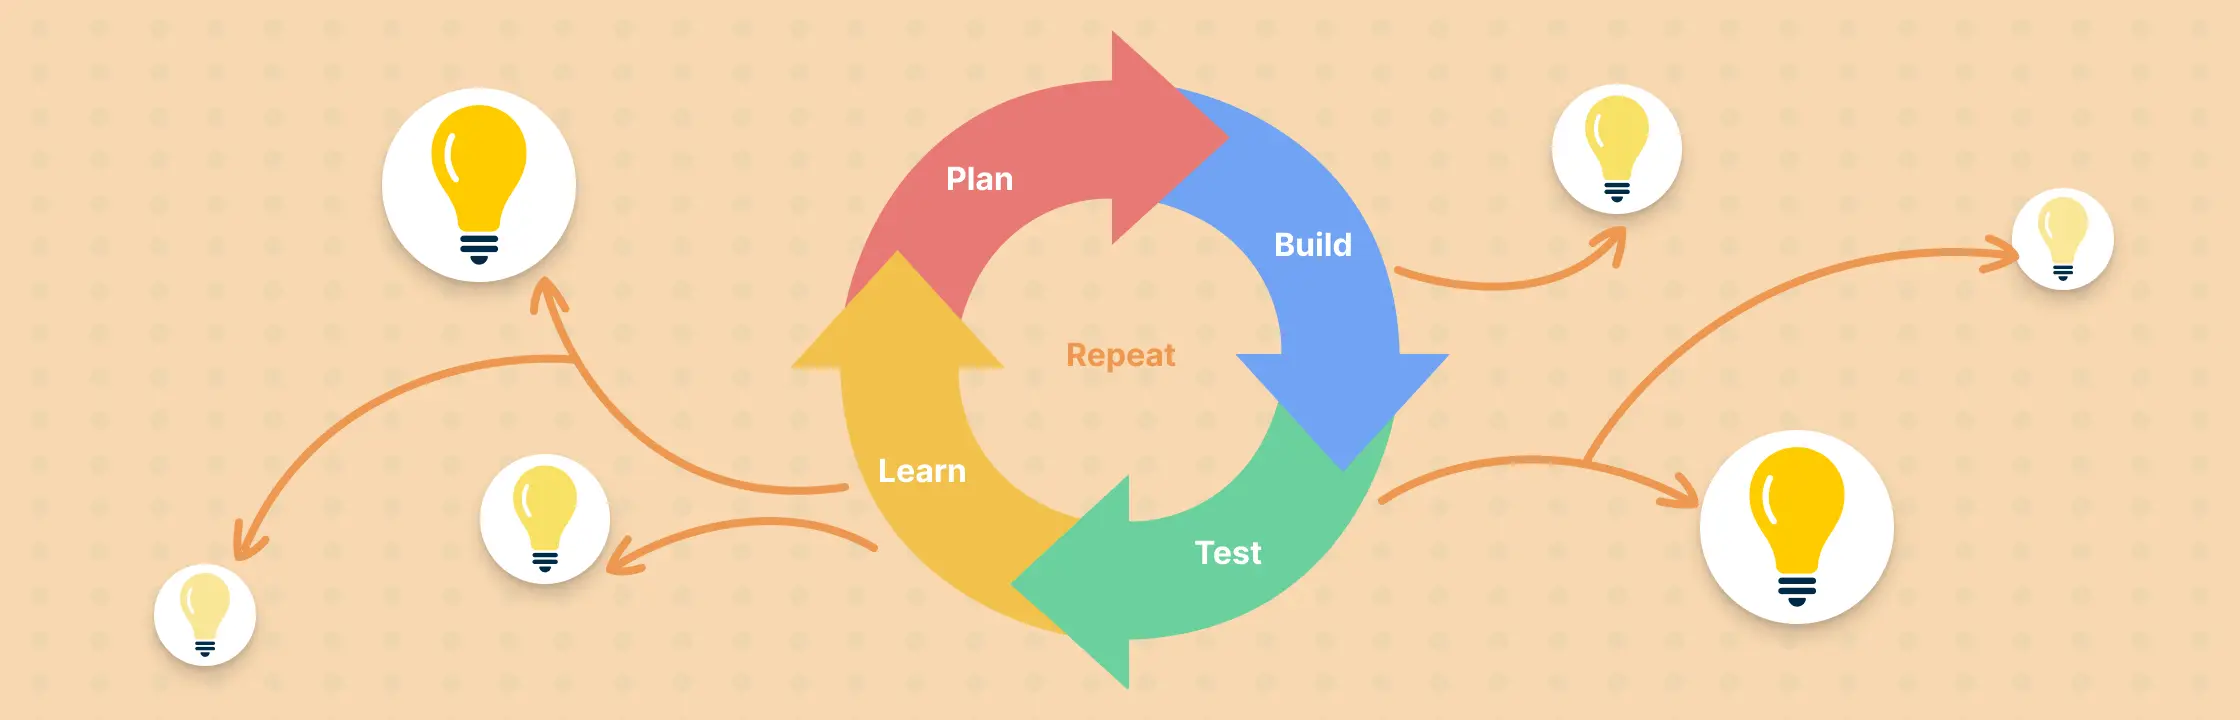 How to Master the Iterative Process